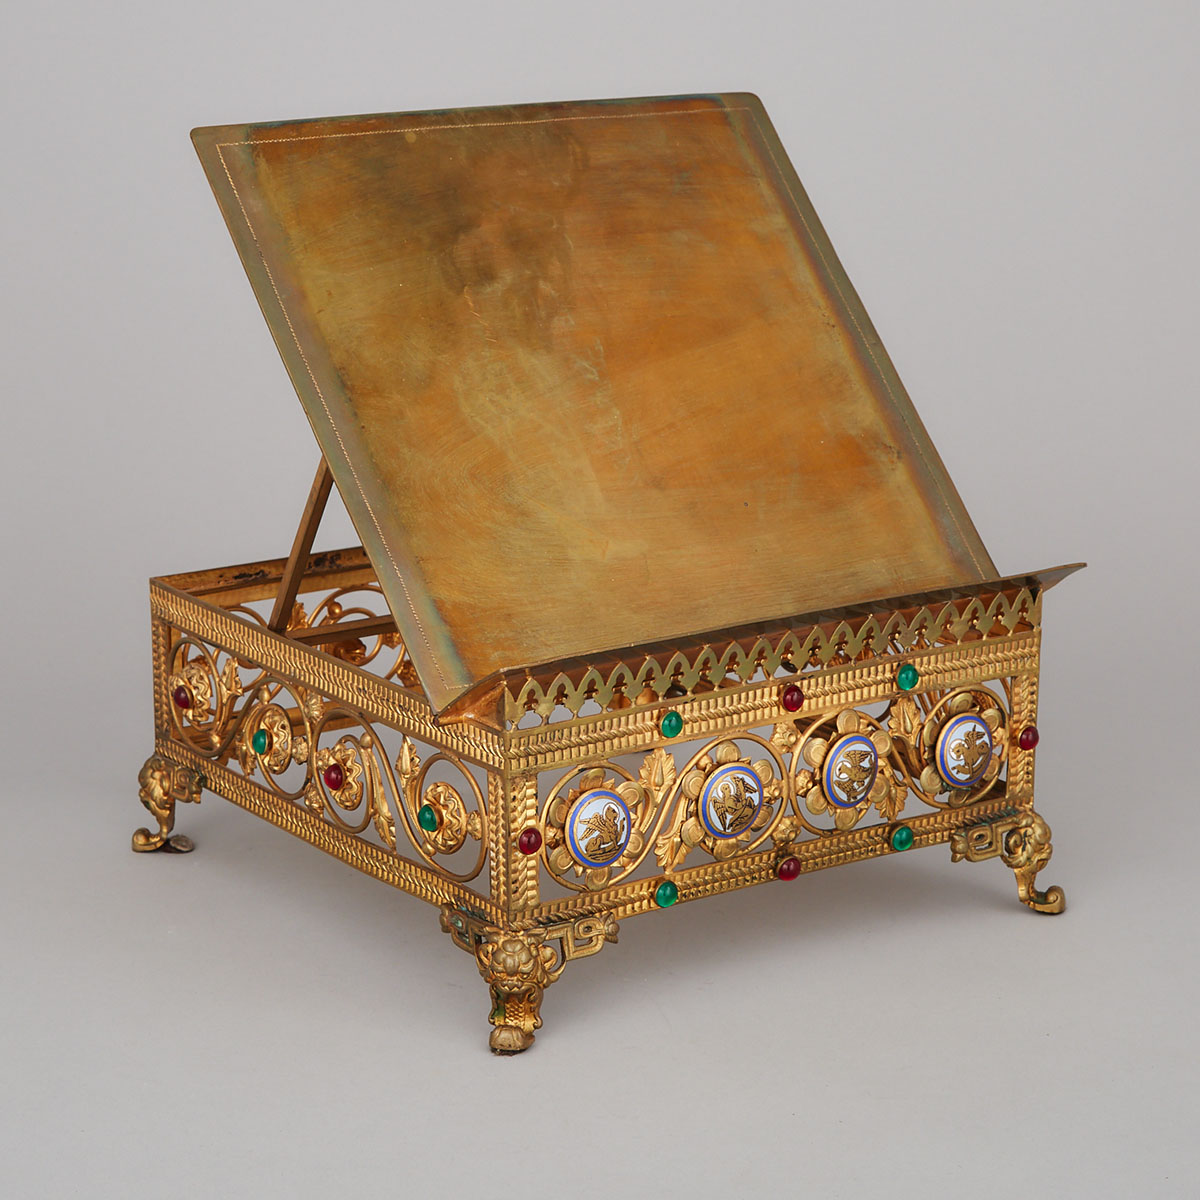 Victorian Gothic Revival Gilt Metal Missal Stand, c.1870